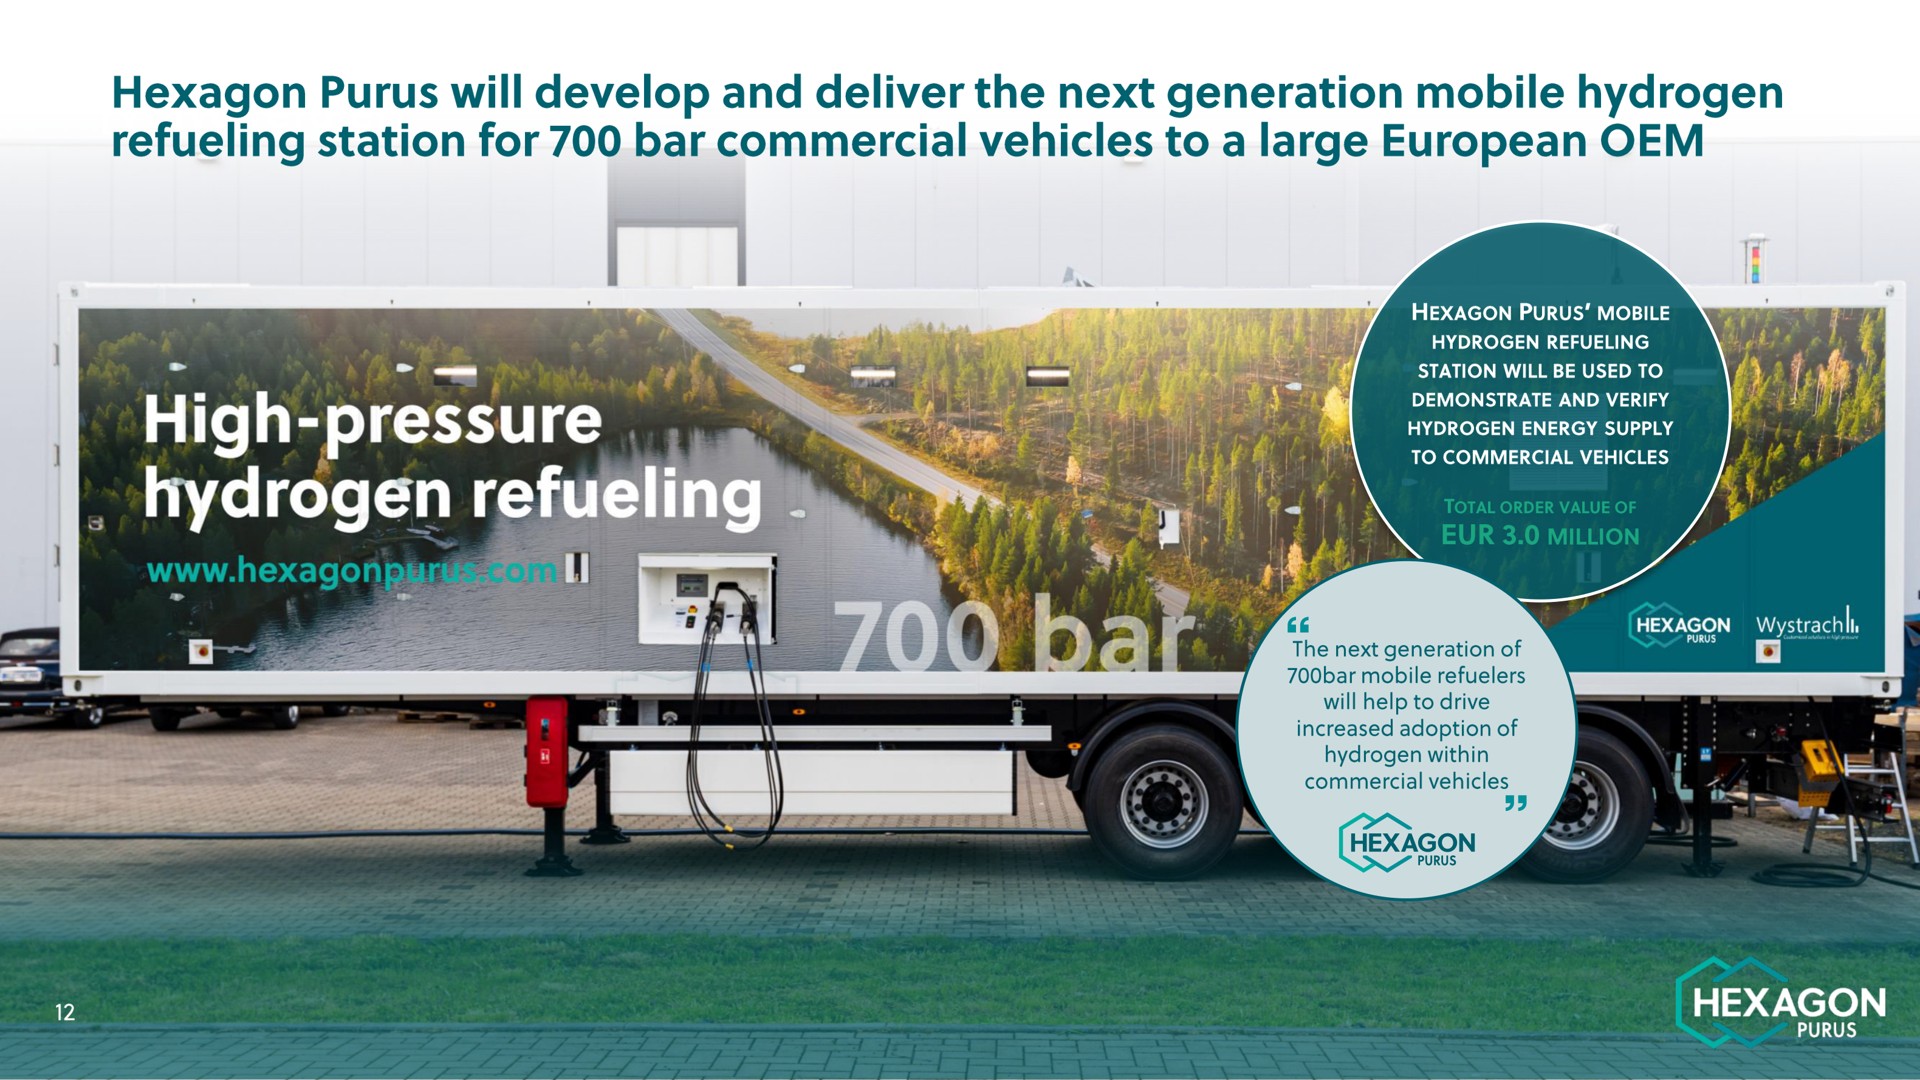 hexagon will develop and deliver the next generation mobile hydrogen refueling station for bar commercial vehicles to a large hydrogen refueling | Hexagon Purus